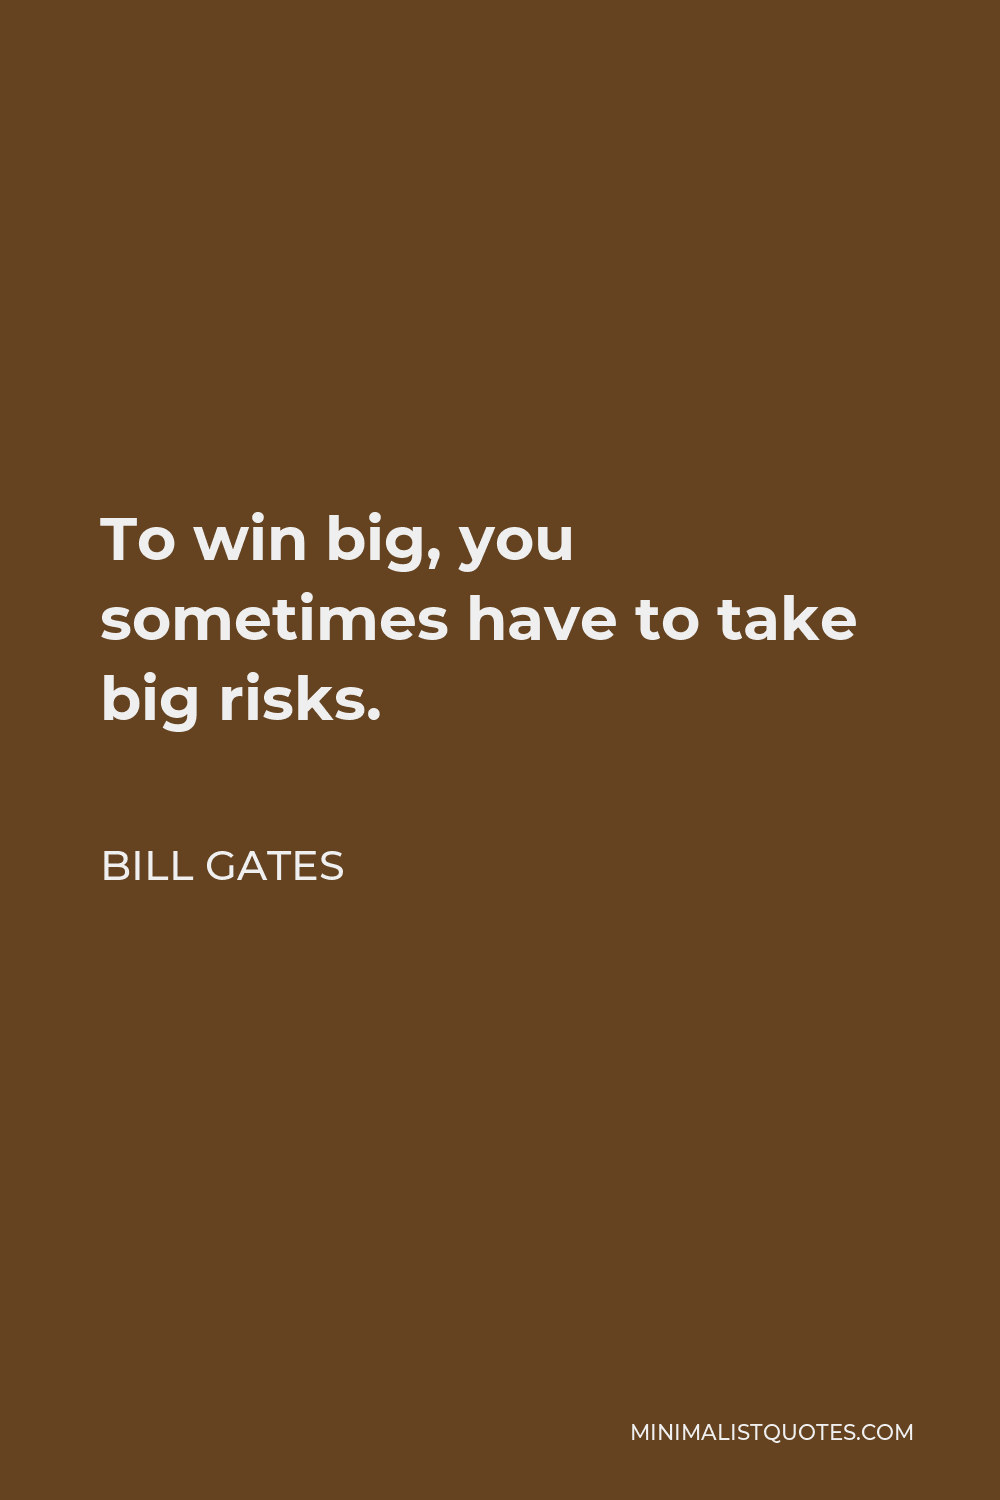 Bill Gates Quote - To win big, you sometimes have to take big risks.